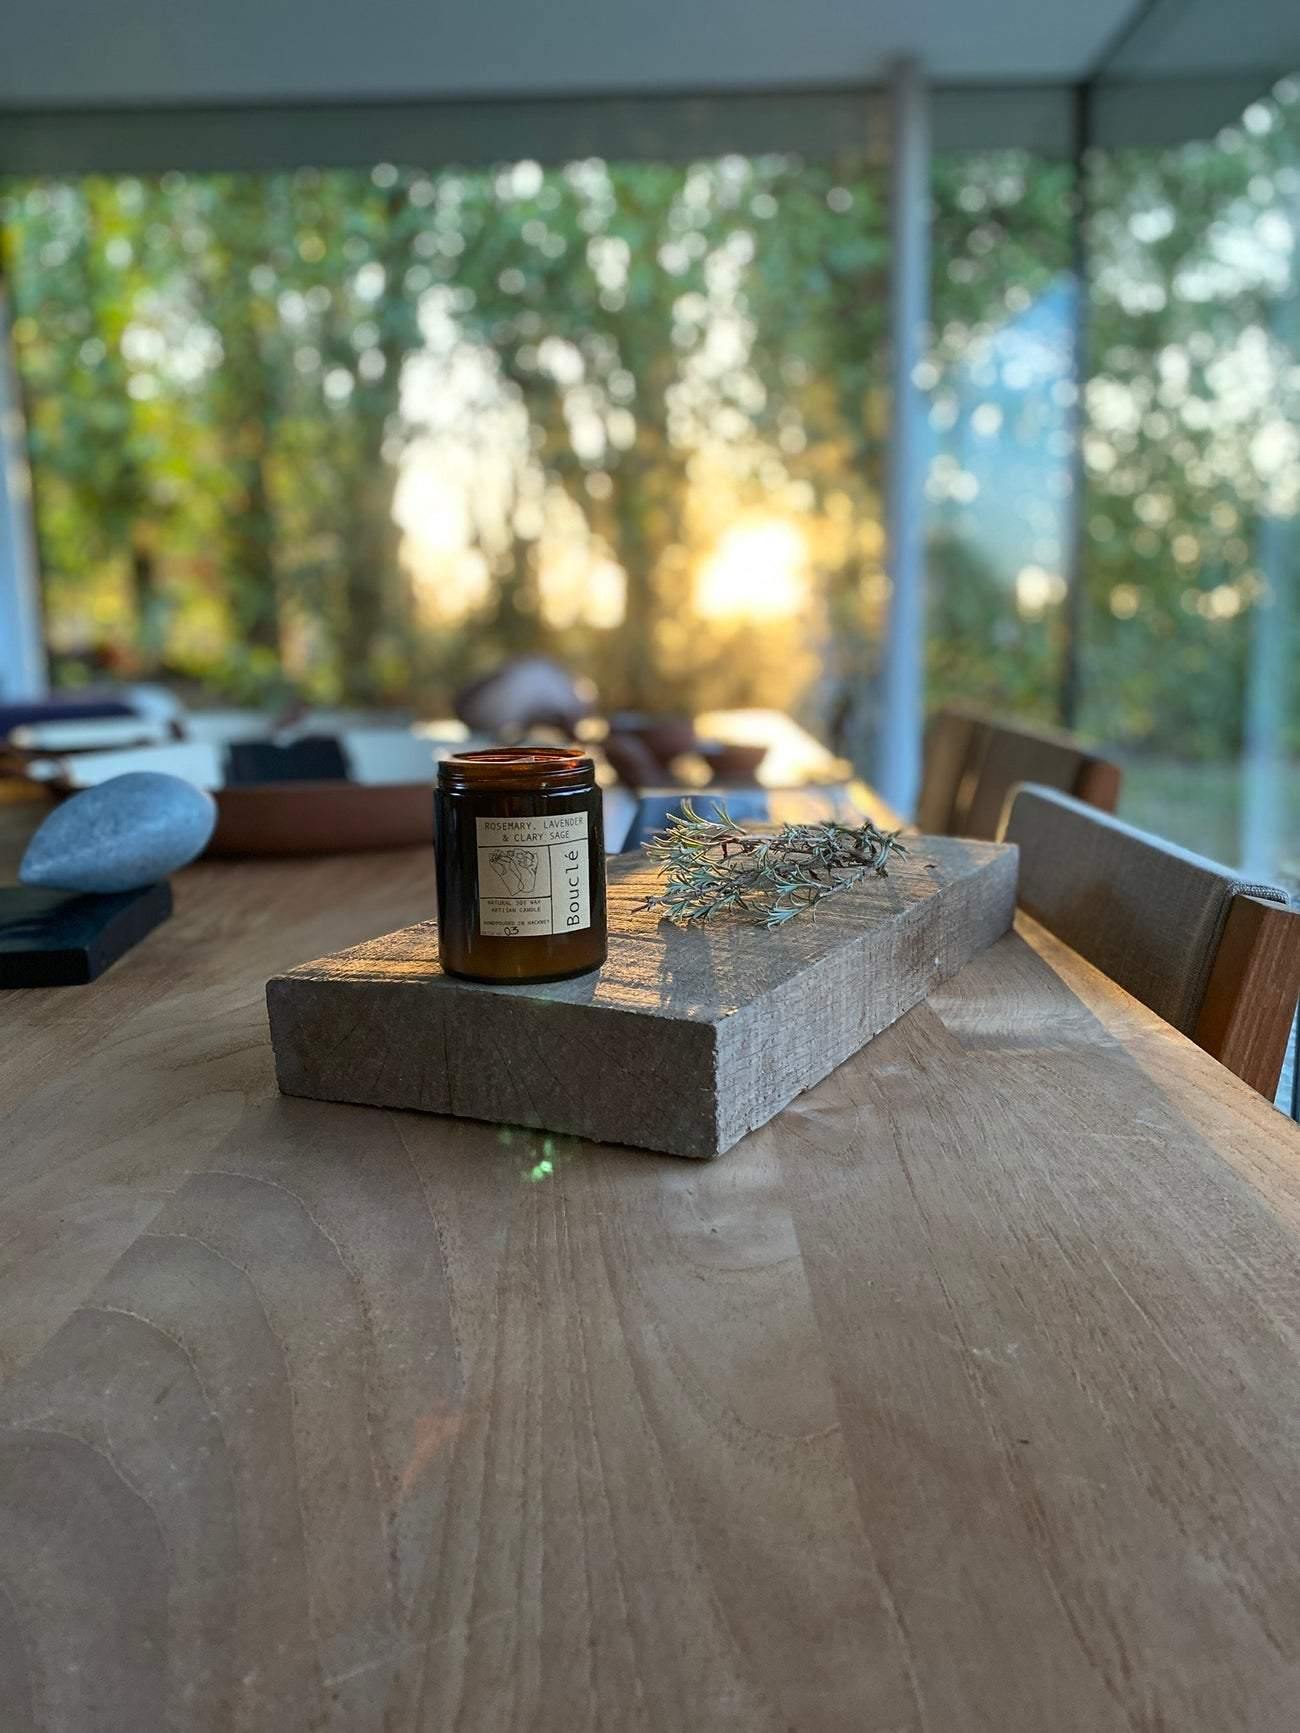 Bouclé rosemary, lavender & clary sage candle on dining table with rustic wooden board.